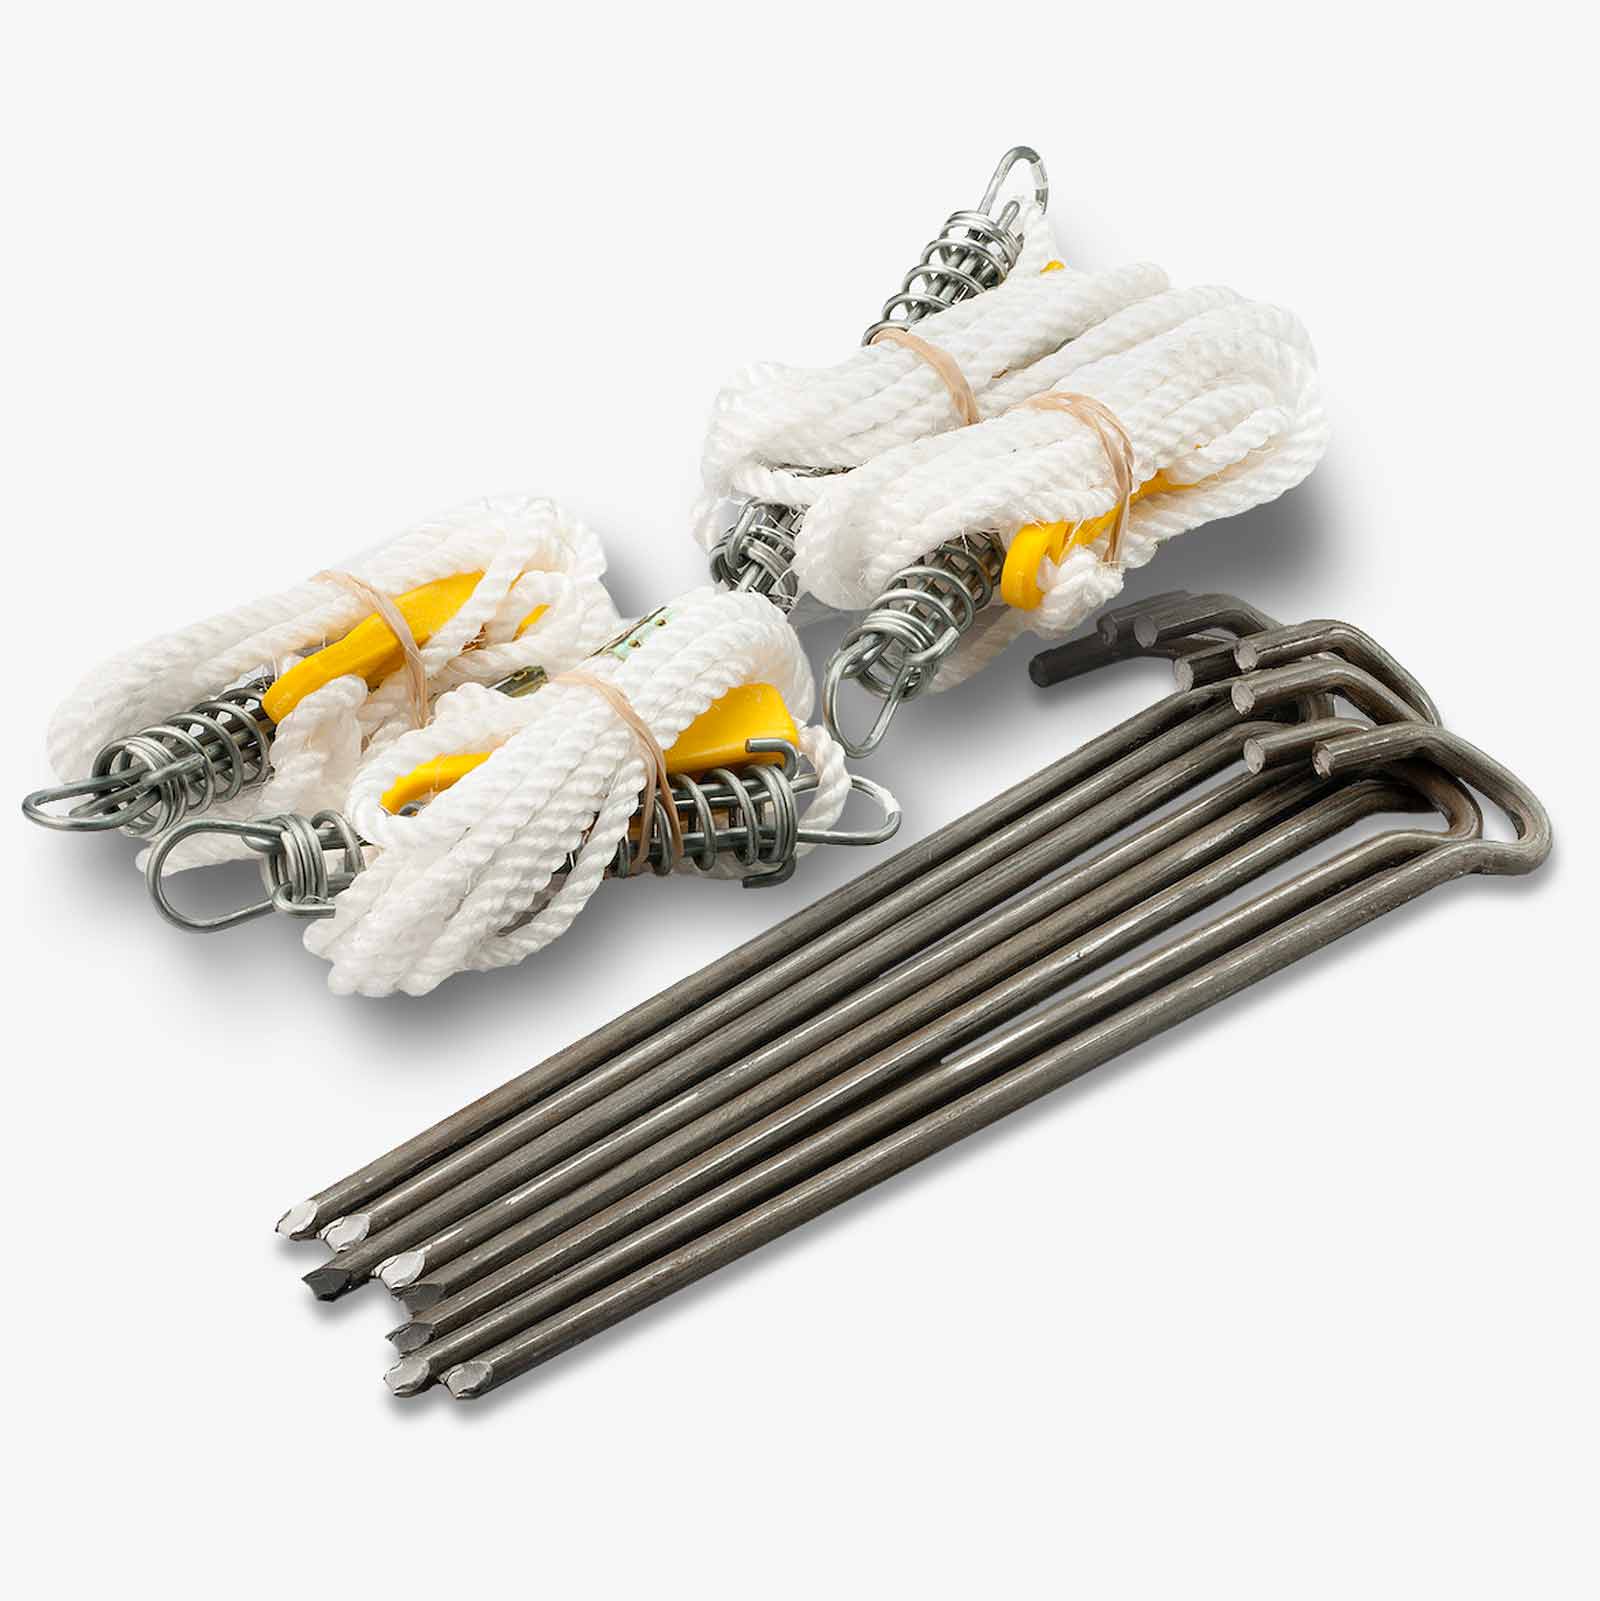 Heavy Duty Pegs And Guy Ropes With Spring Tensioners